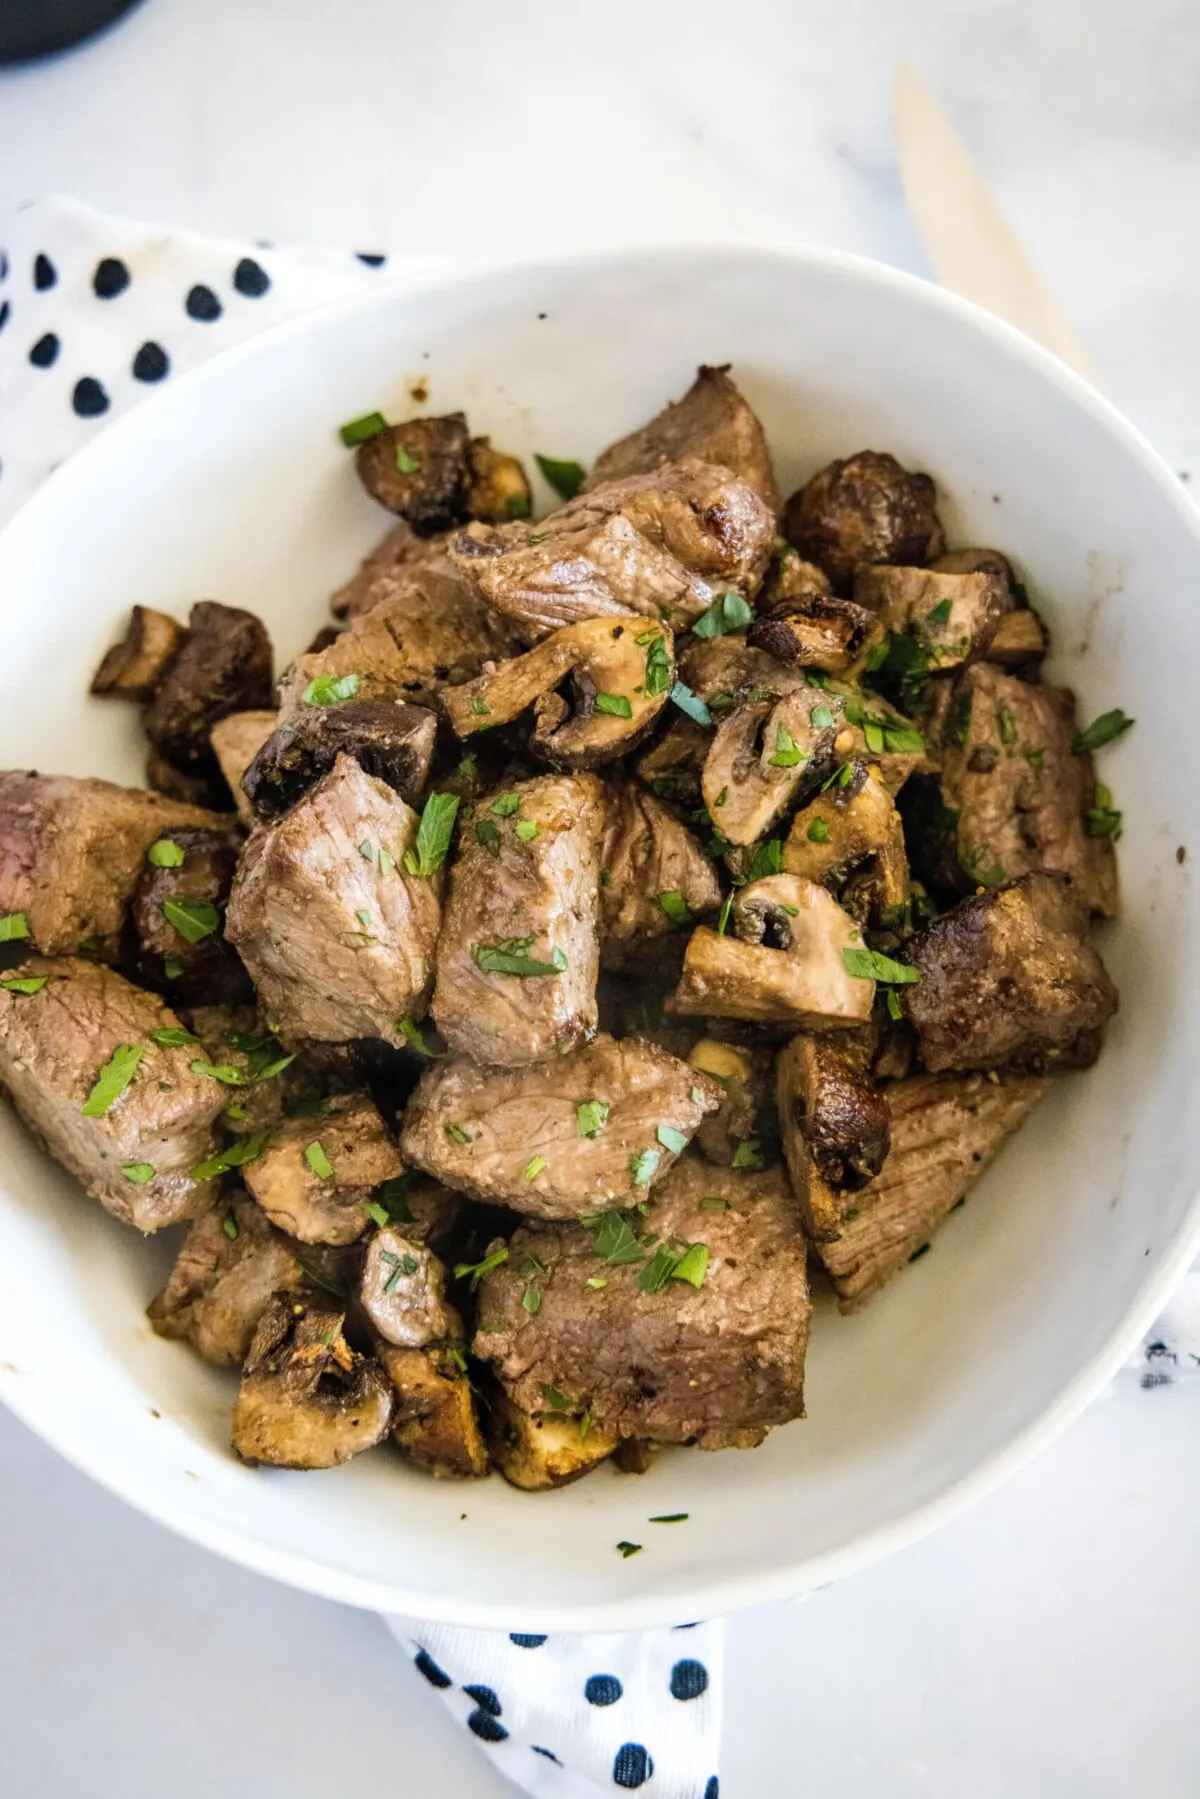 Overhead view of a bowl of steak and mushroom bites